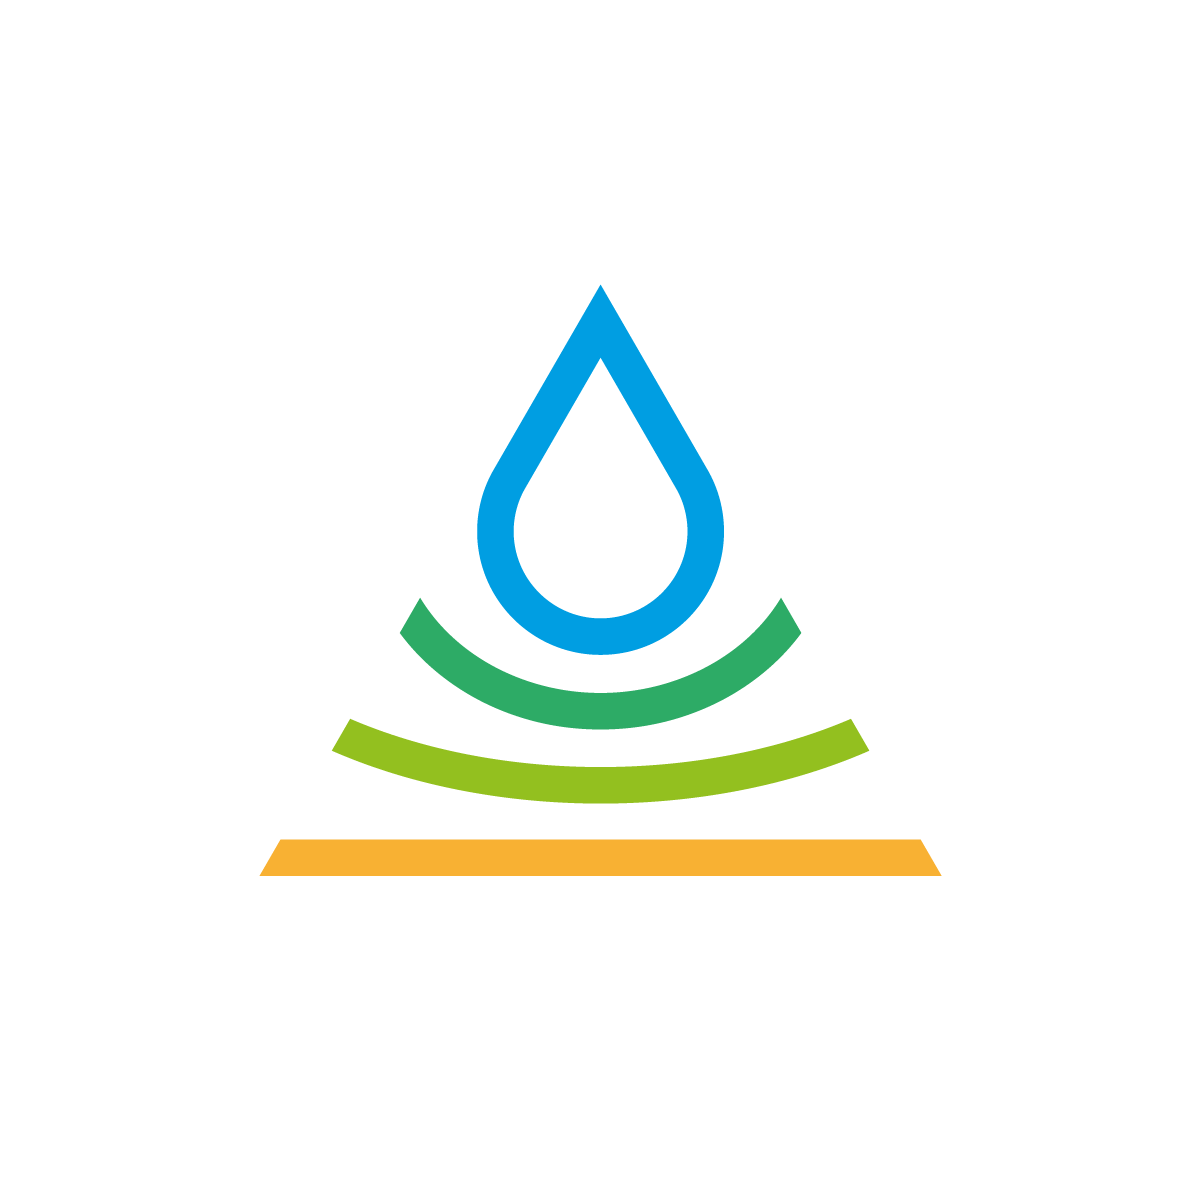 Triangle Drop Logo blends triangles and circles into a raindrop shape, symbolizing growth, unity, and nurturing, tailored for agricultural businesses.